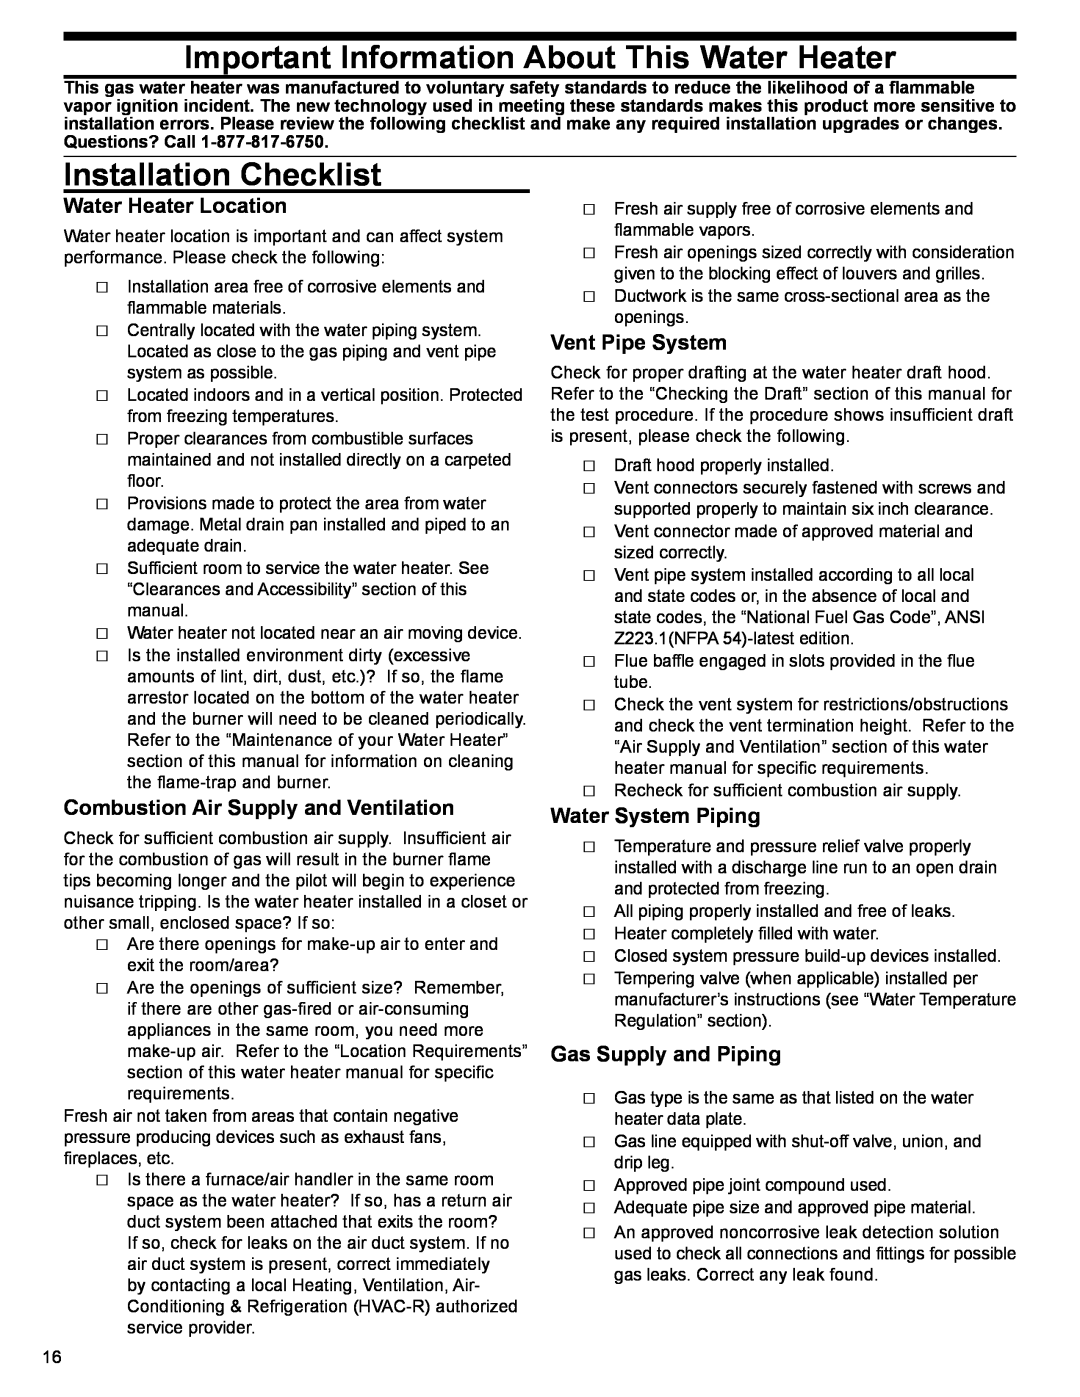 Whirlpool 315422-000 Installation Checklist, Important Information About This Water Heater, Water Heater Location 